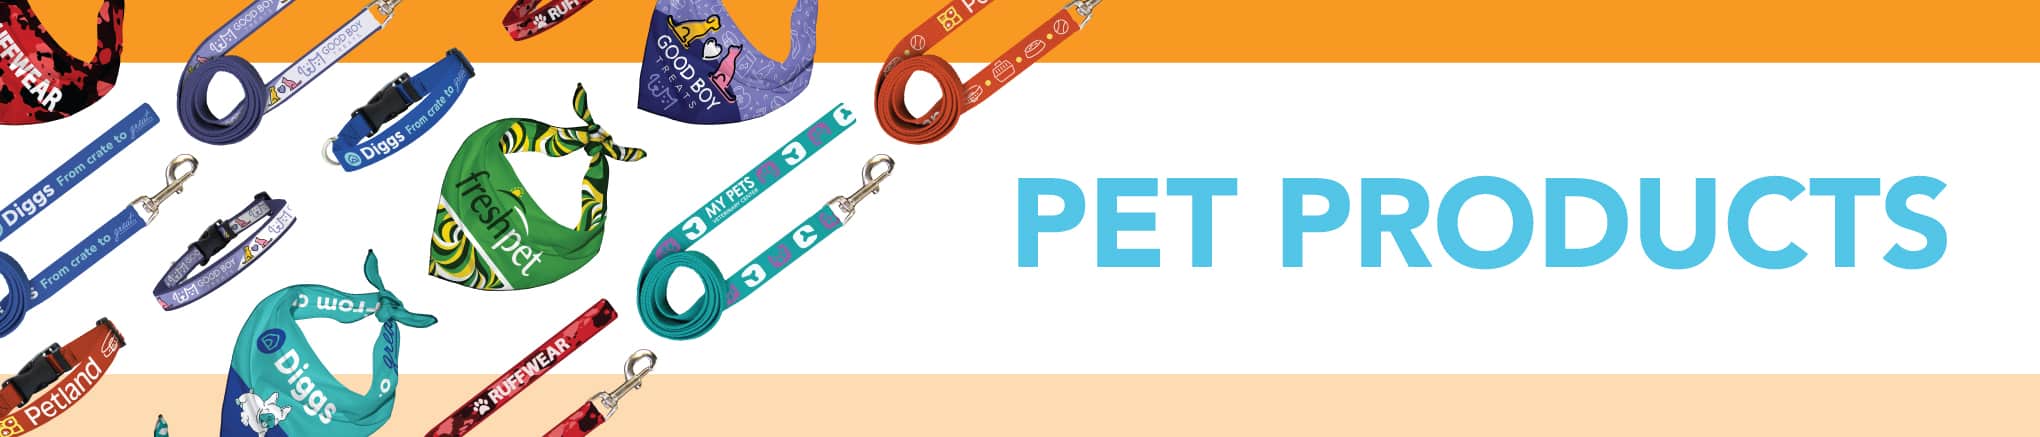 Pet Products!